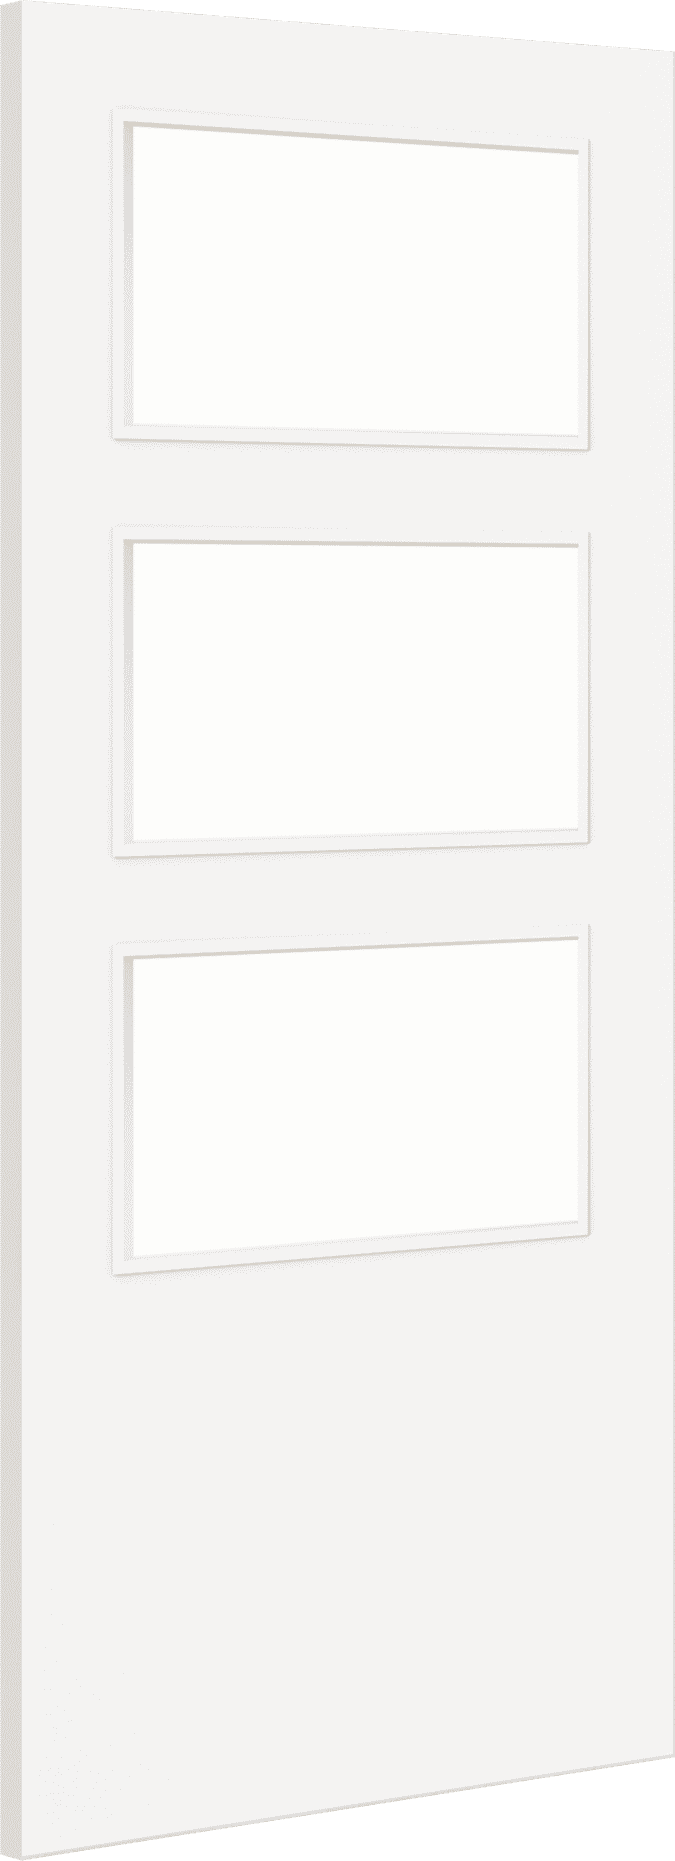 1981mm x 914mm x 44mm (36") Architectural Paint Grade White 03 Frosted Glazed Fire Door Blank